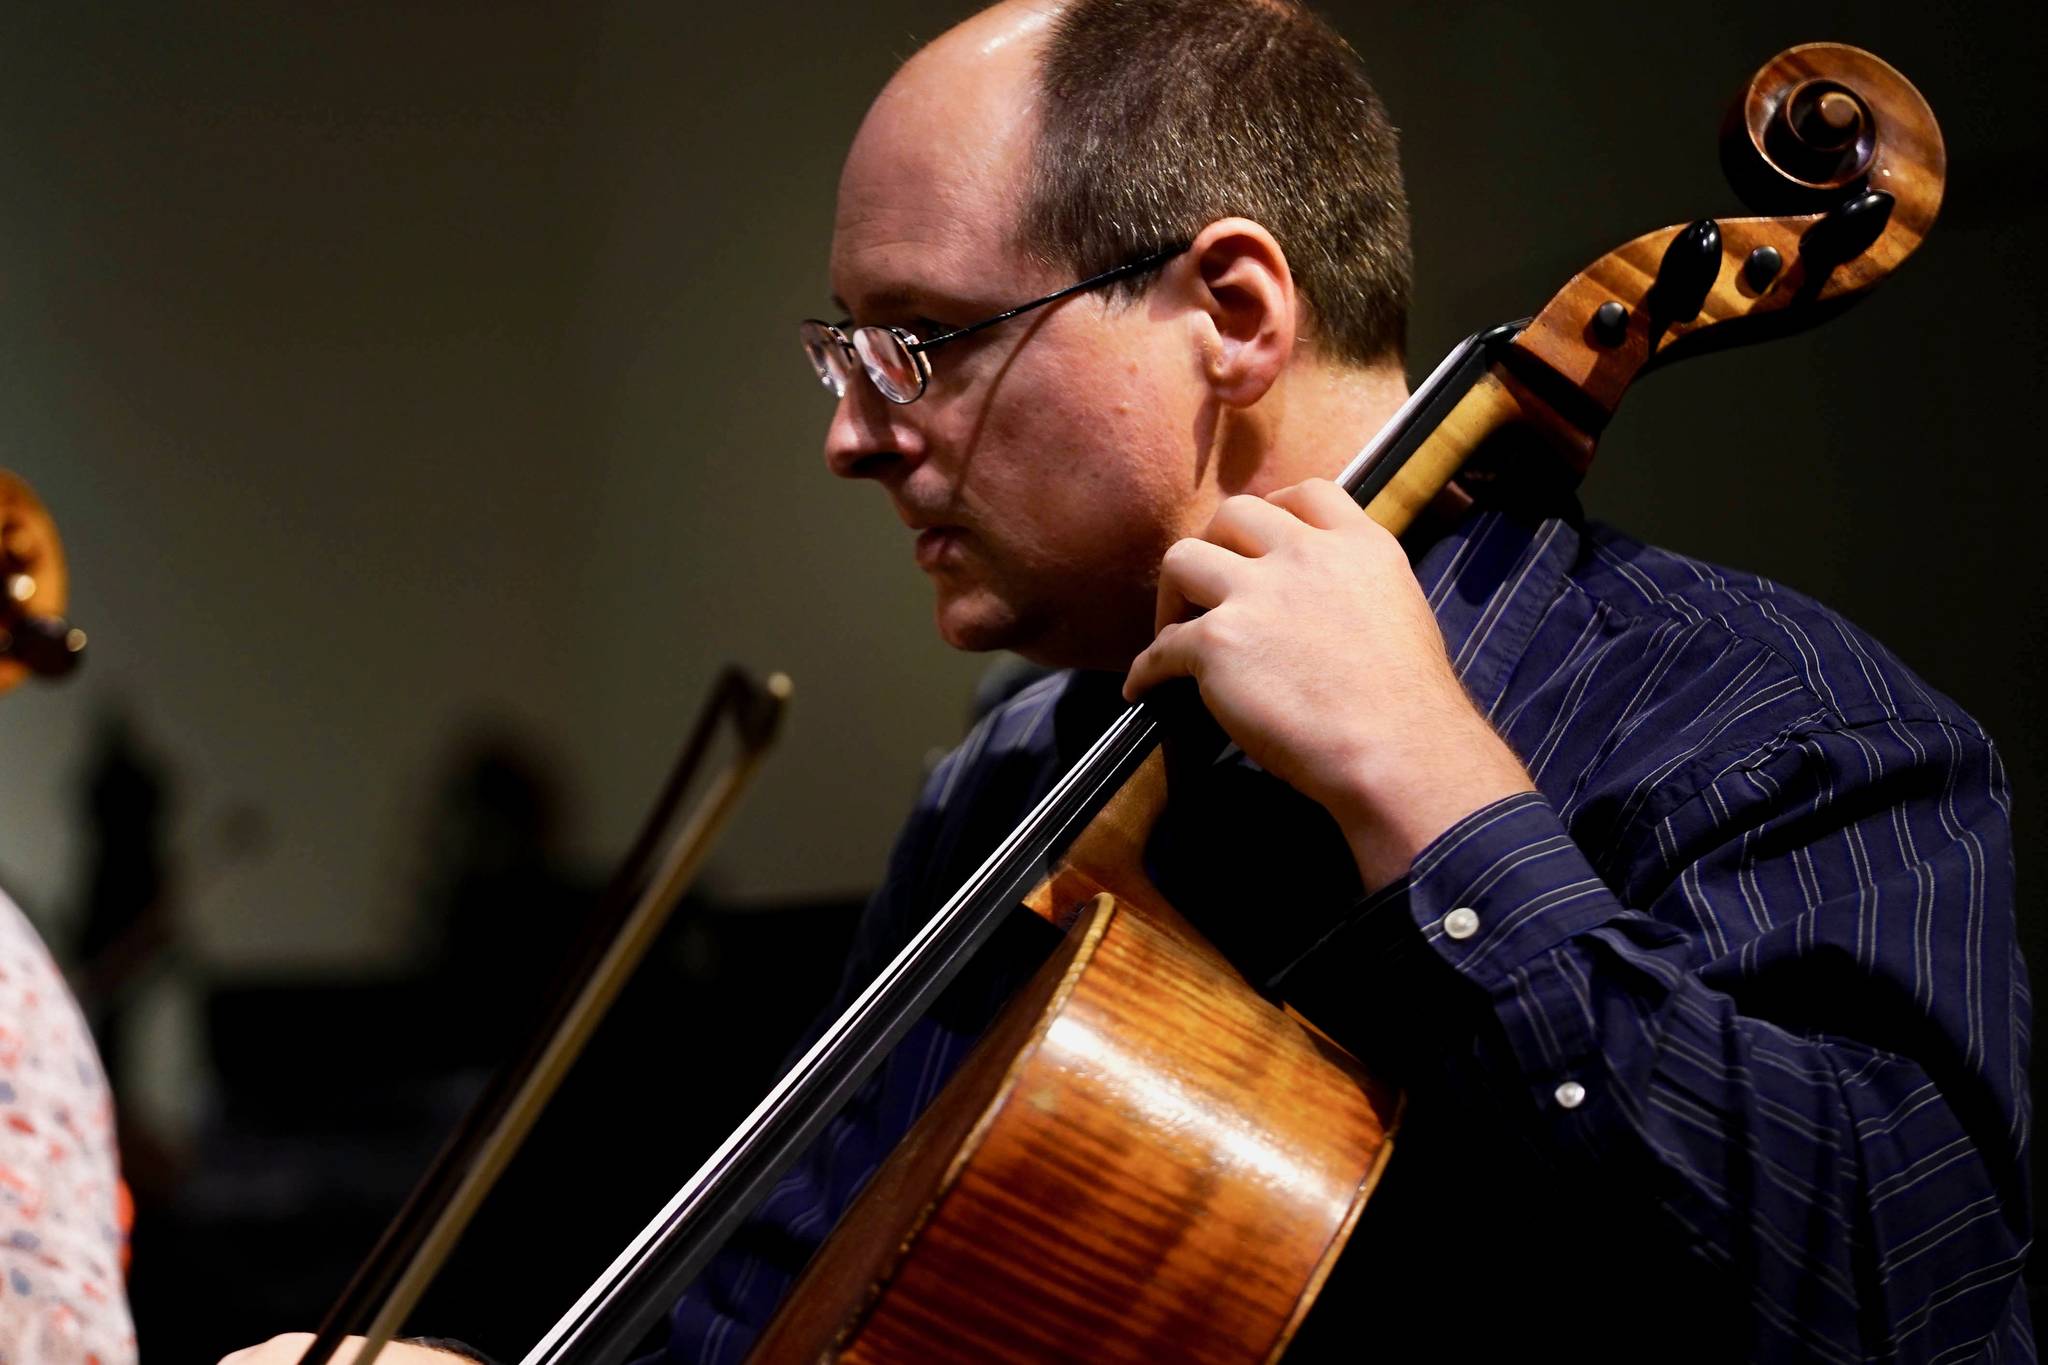 Brian Wharton, Auburn Symphony Orchestra’s principal cellist, rehearses. Wharton joins three other cellists from the orchestra for two chamber series concerts in November. COURTESY PHOTO, ASO